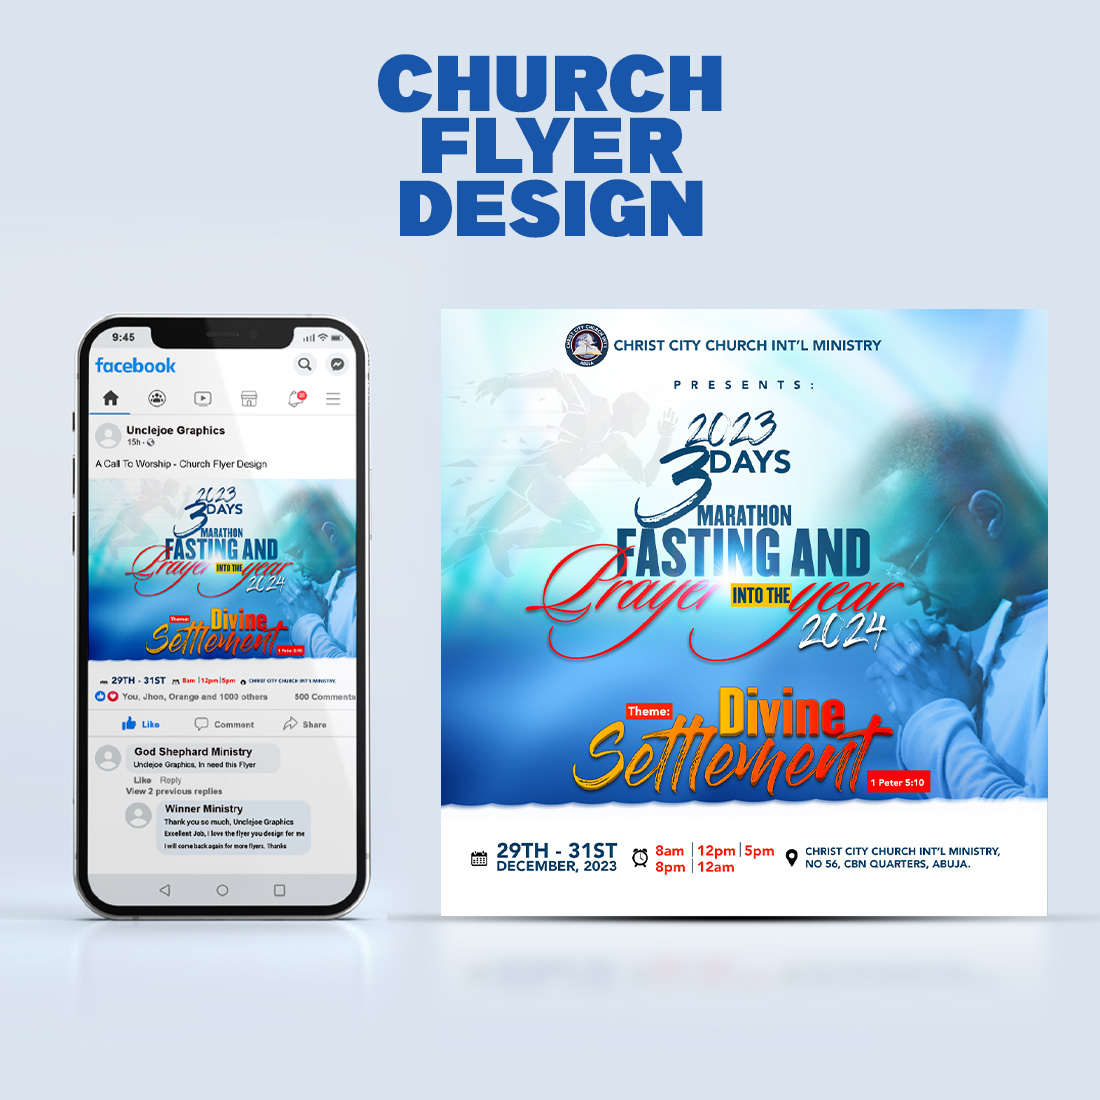 CHURCH FLYER DESIGN IN ADOBE PHOTOSHOP DOCUMENT (PSD) cover image.